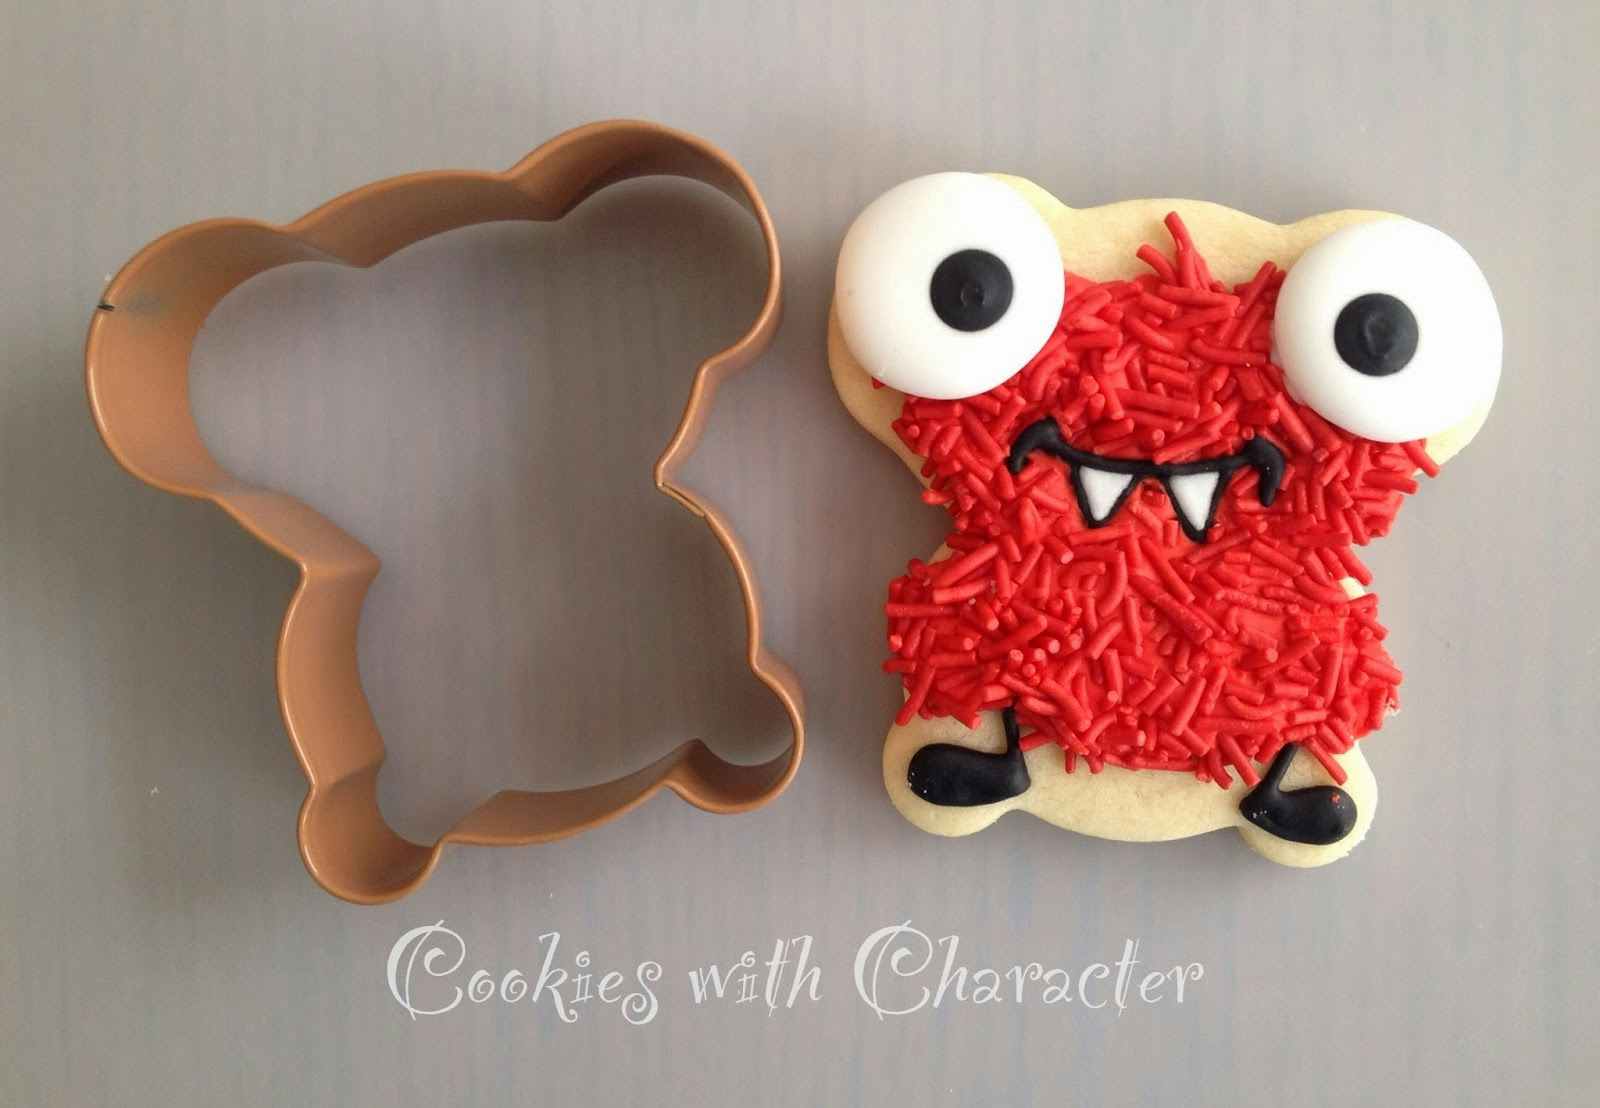 Make monster cookies with an upside down teddy bear.